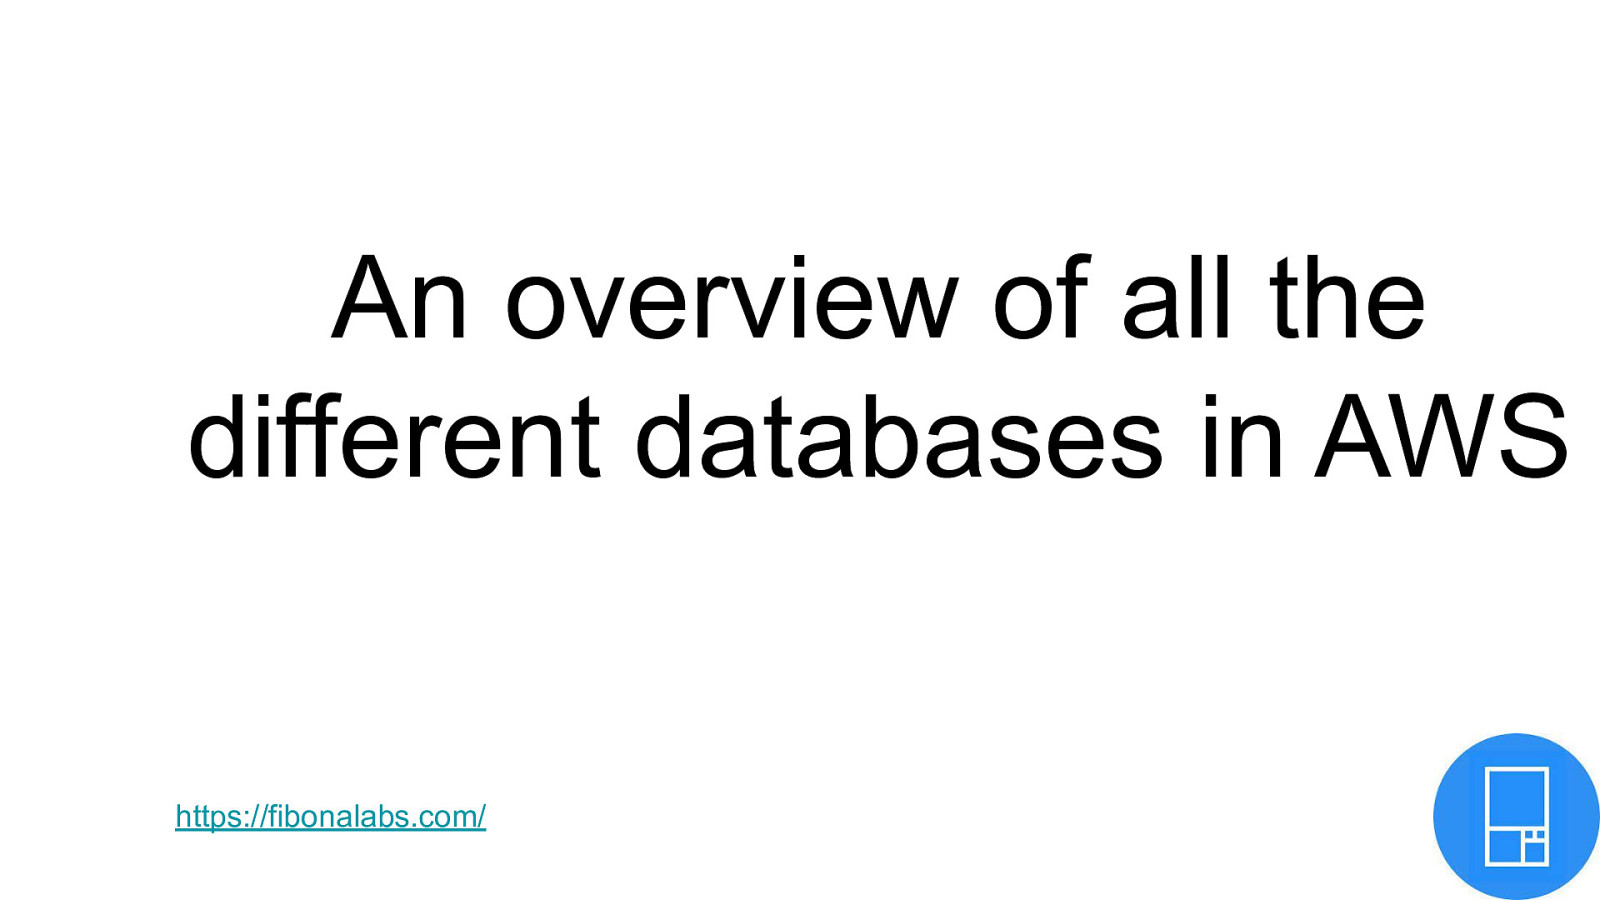 An Overview of All the Different Databases in AWS